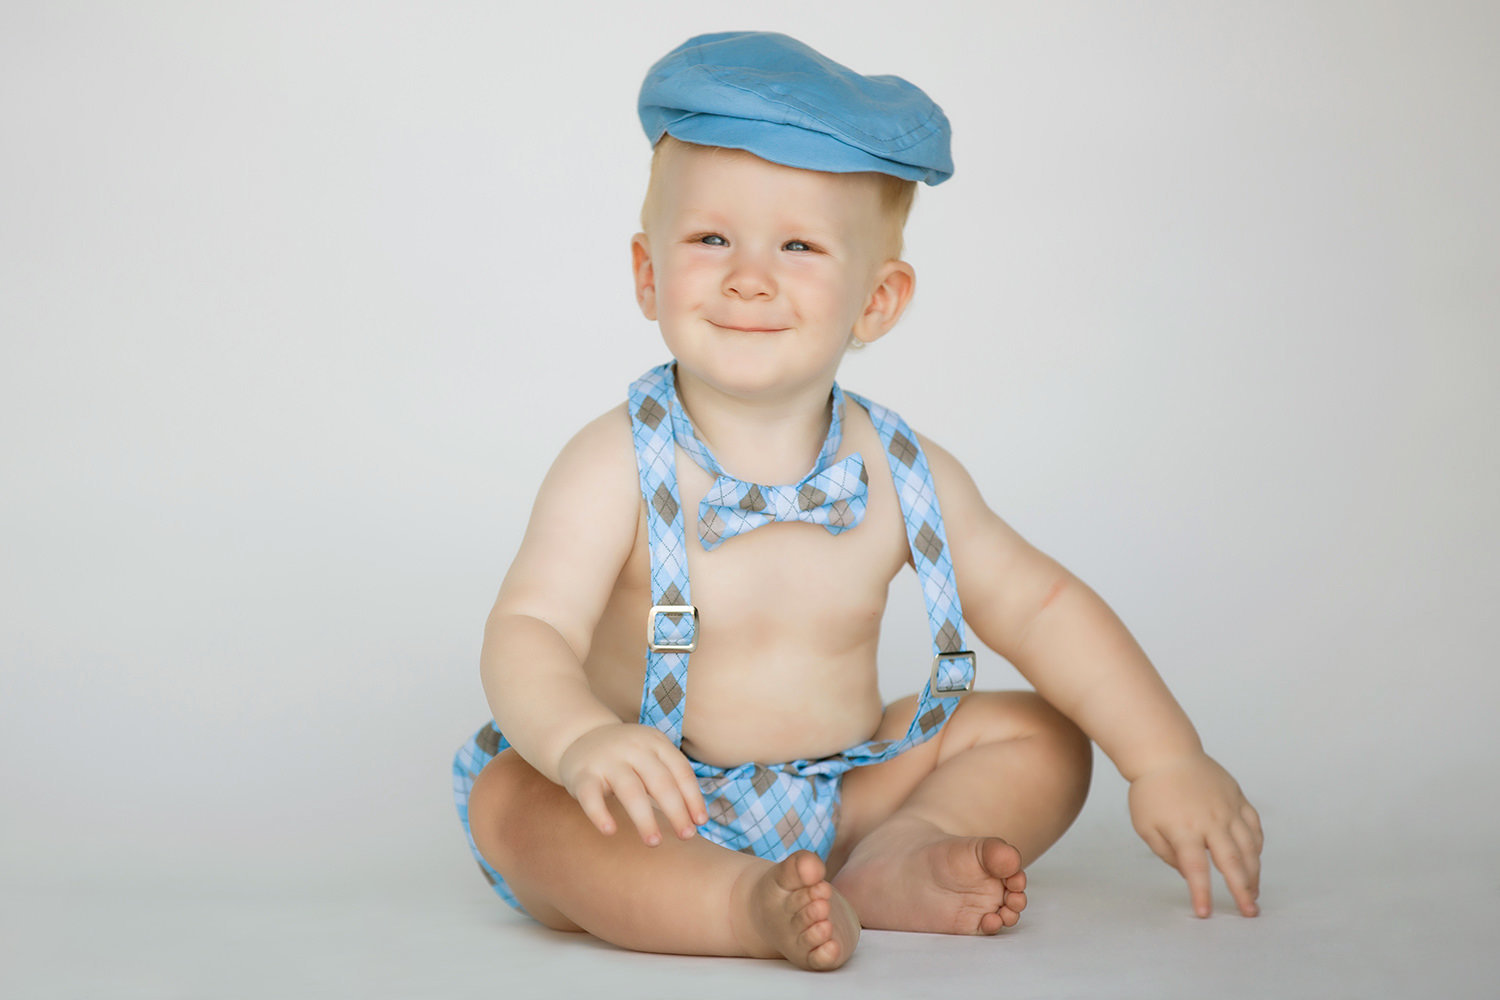 san diego family photographer | little boy with bowtie and suspenders cute blue hat